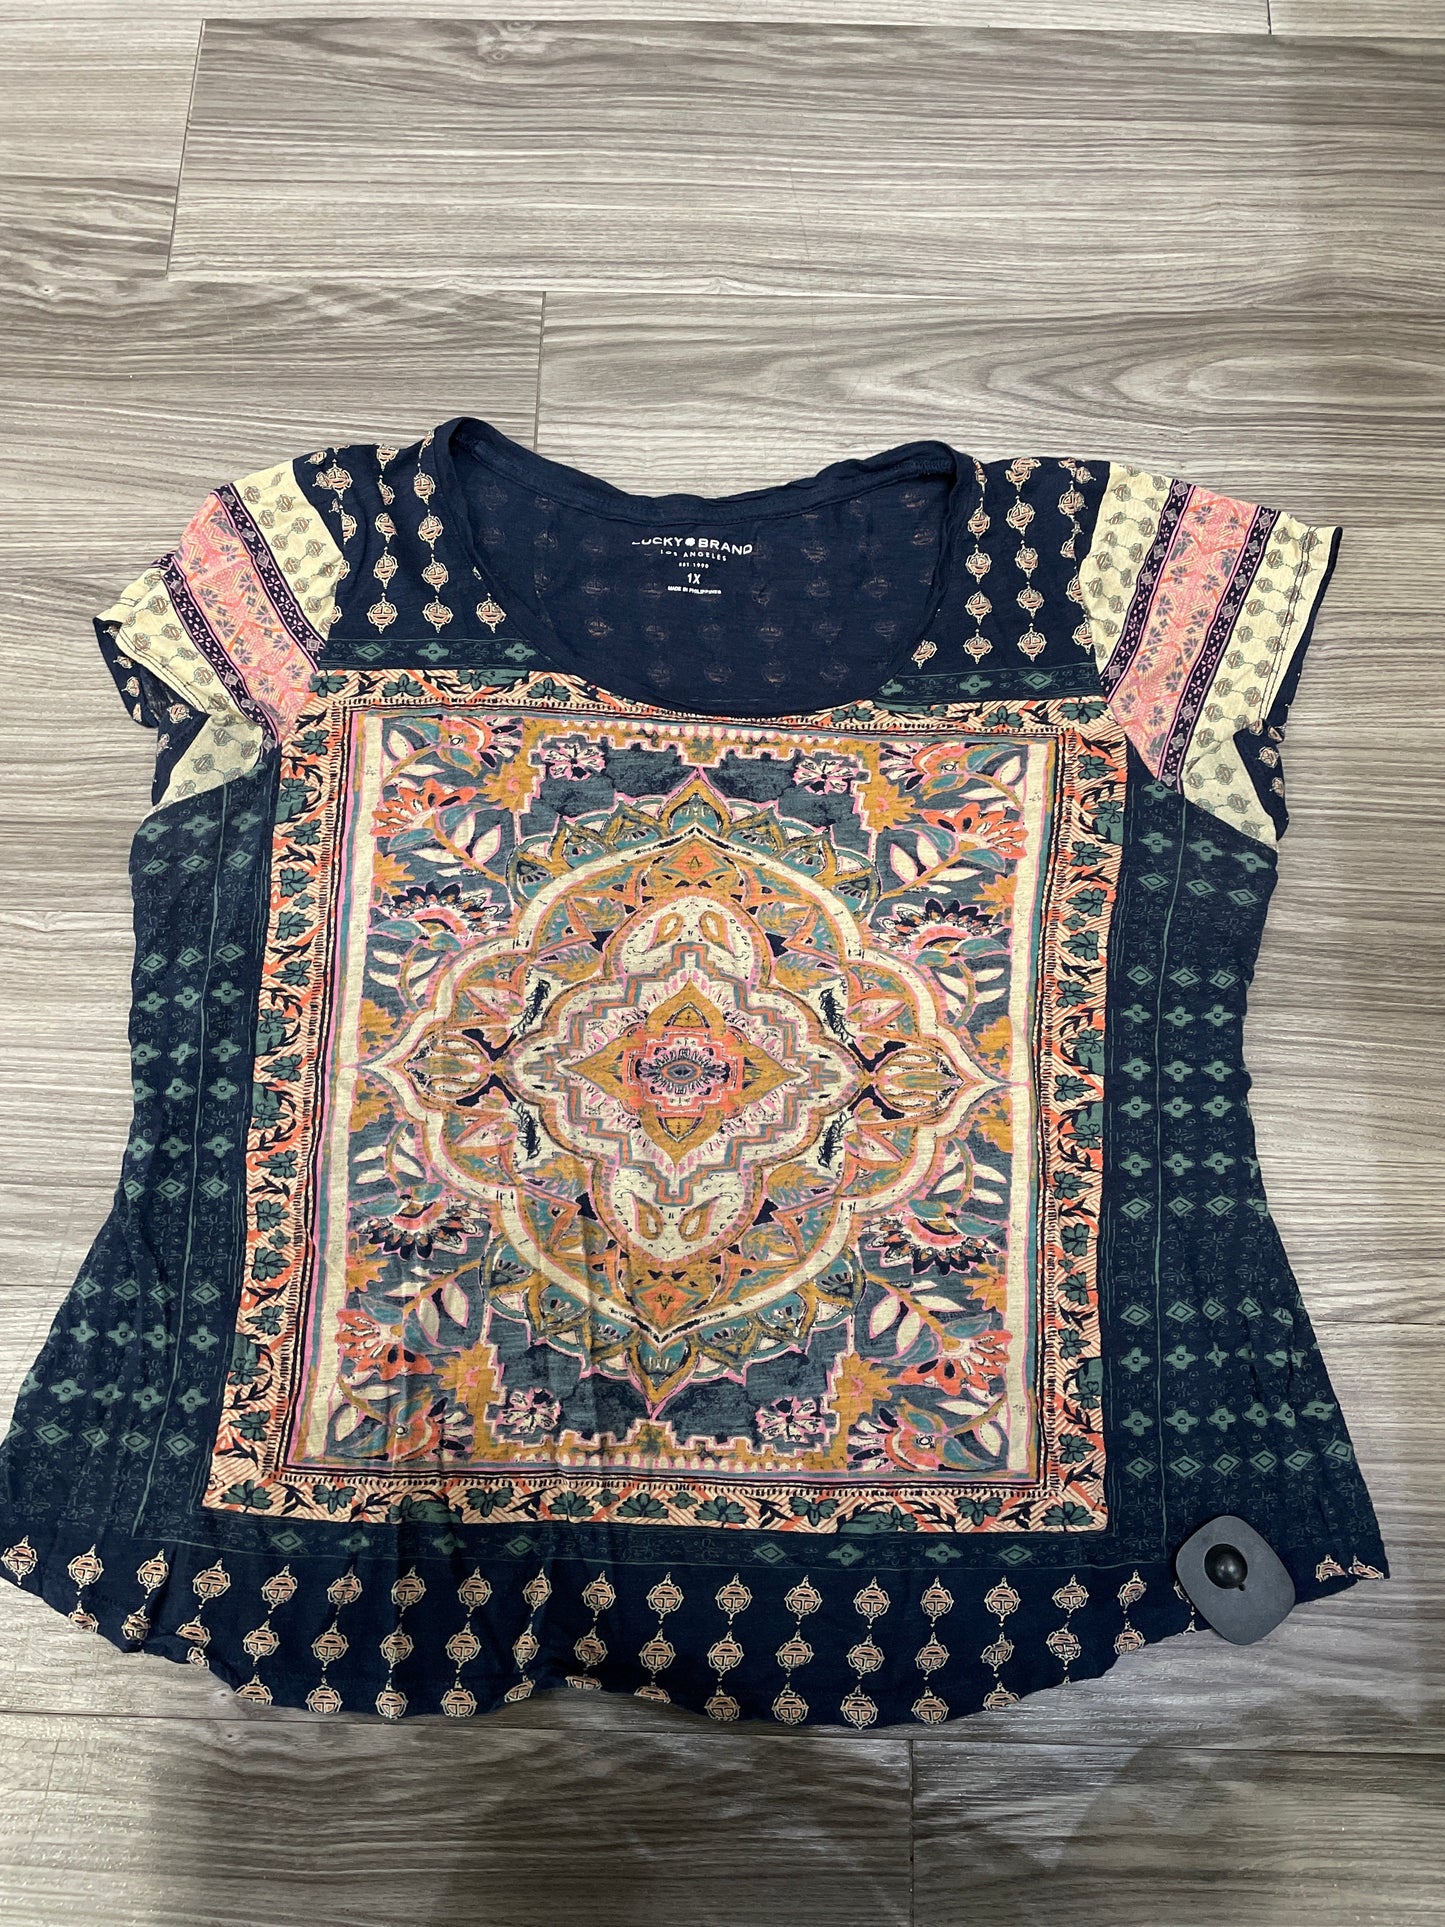 Multi-colored Top Short Sleeve Lucky Brand, Size Xl